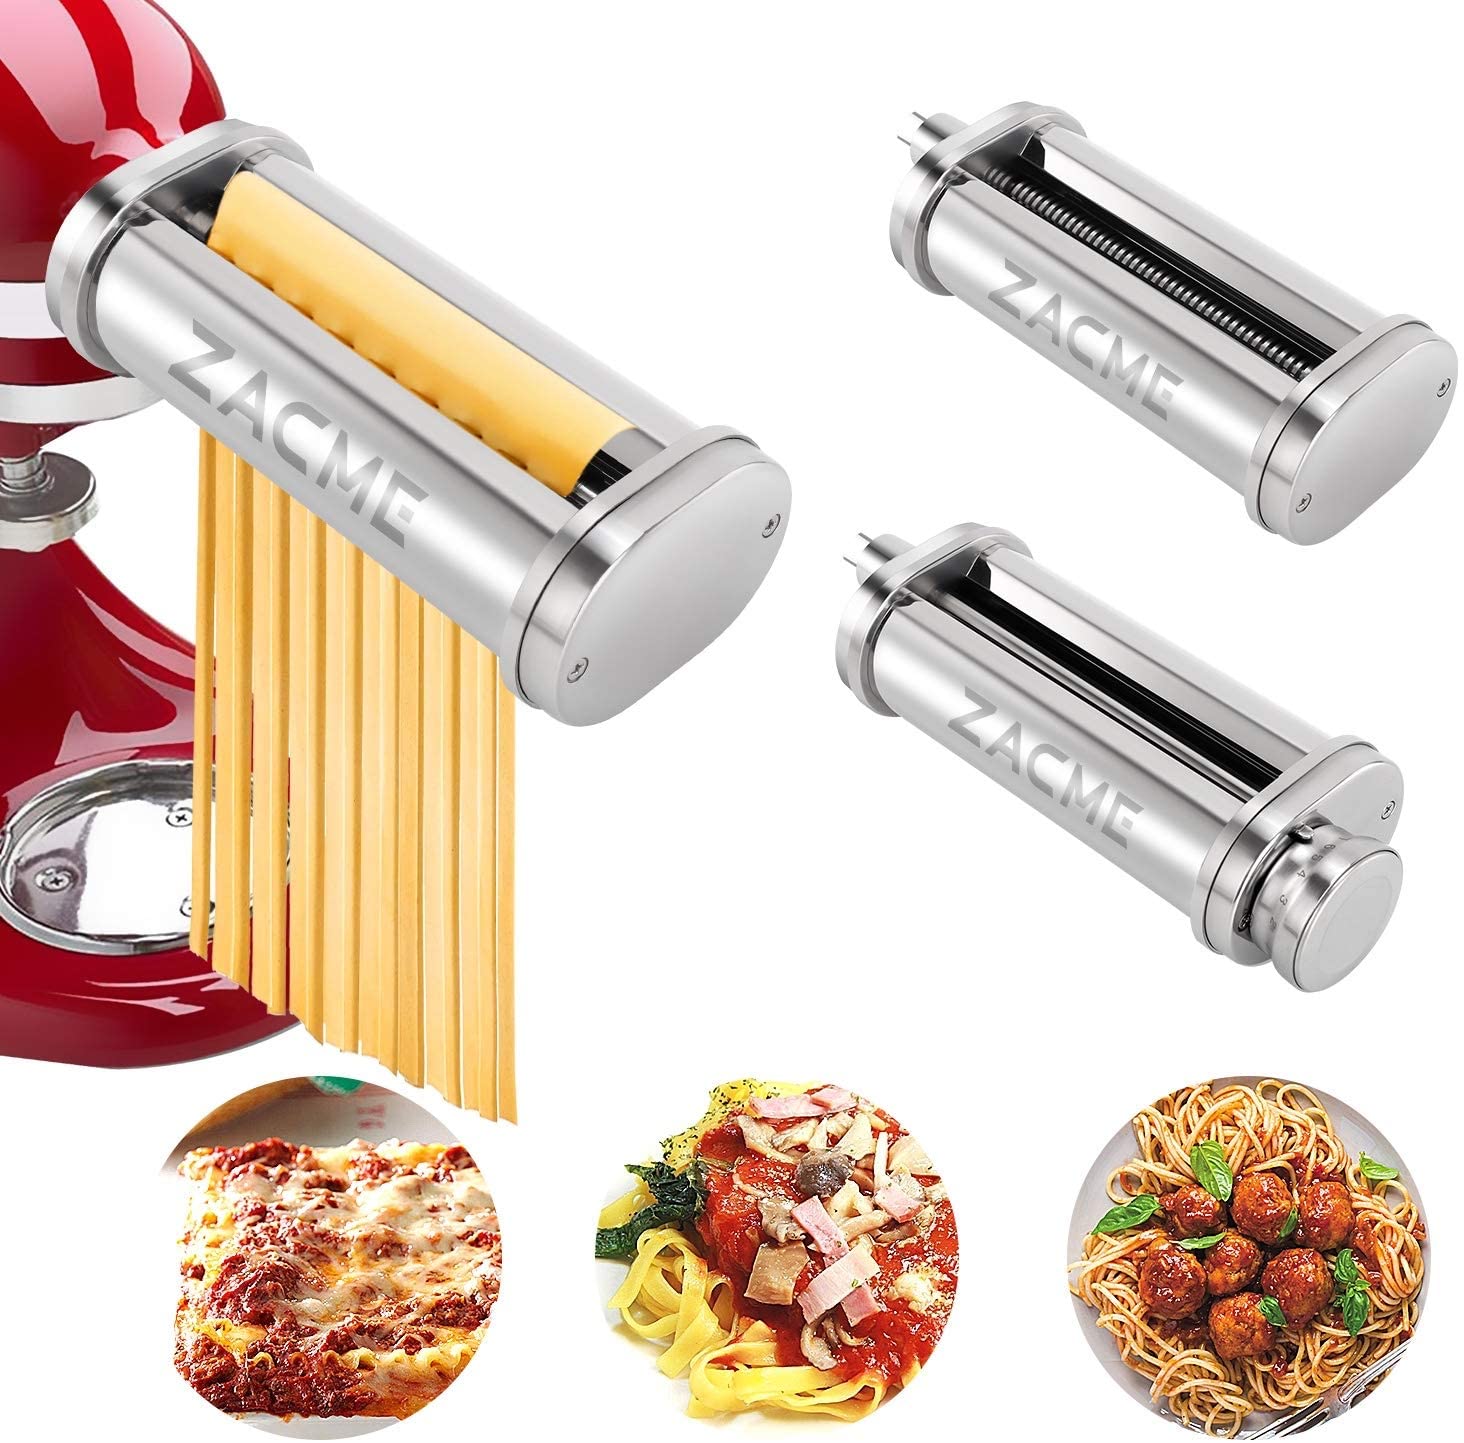 DUYUJIE r Attachment, Zacme 3-in-1 Pasta Roller & Cutter Attachments Set for Kitche